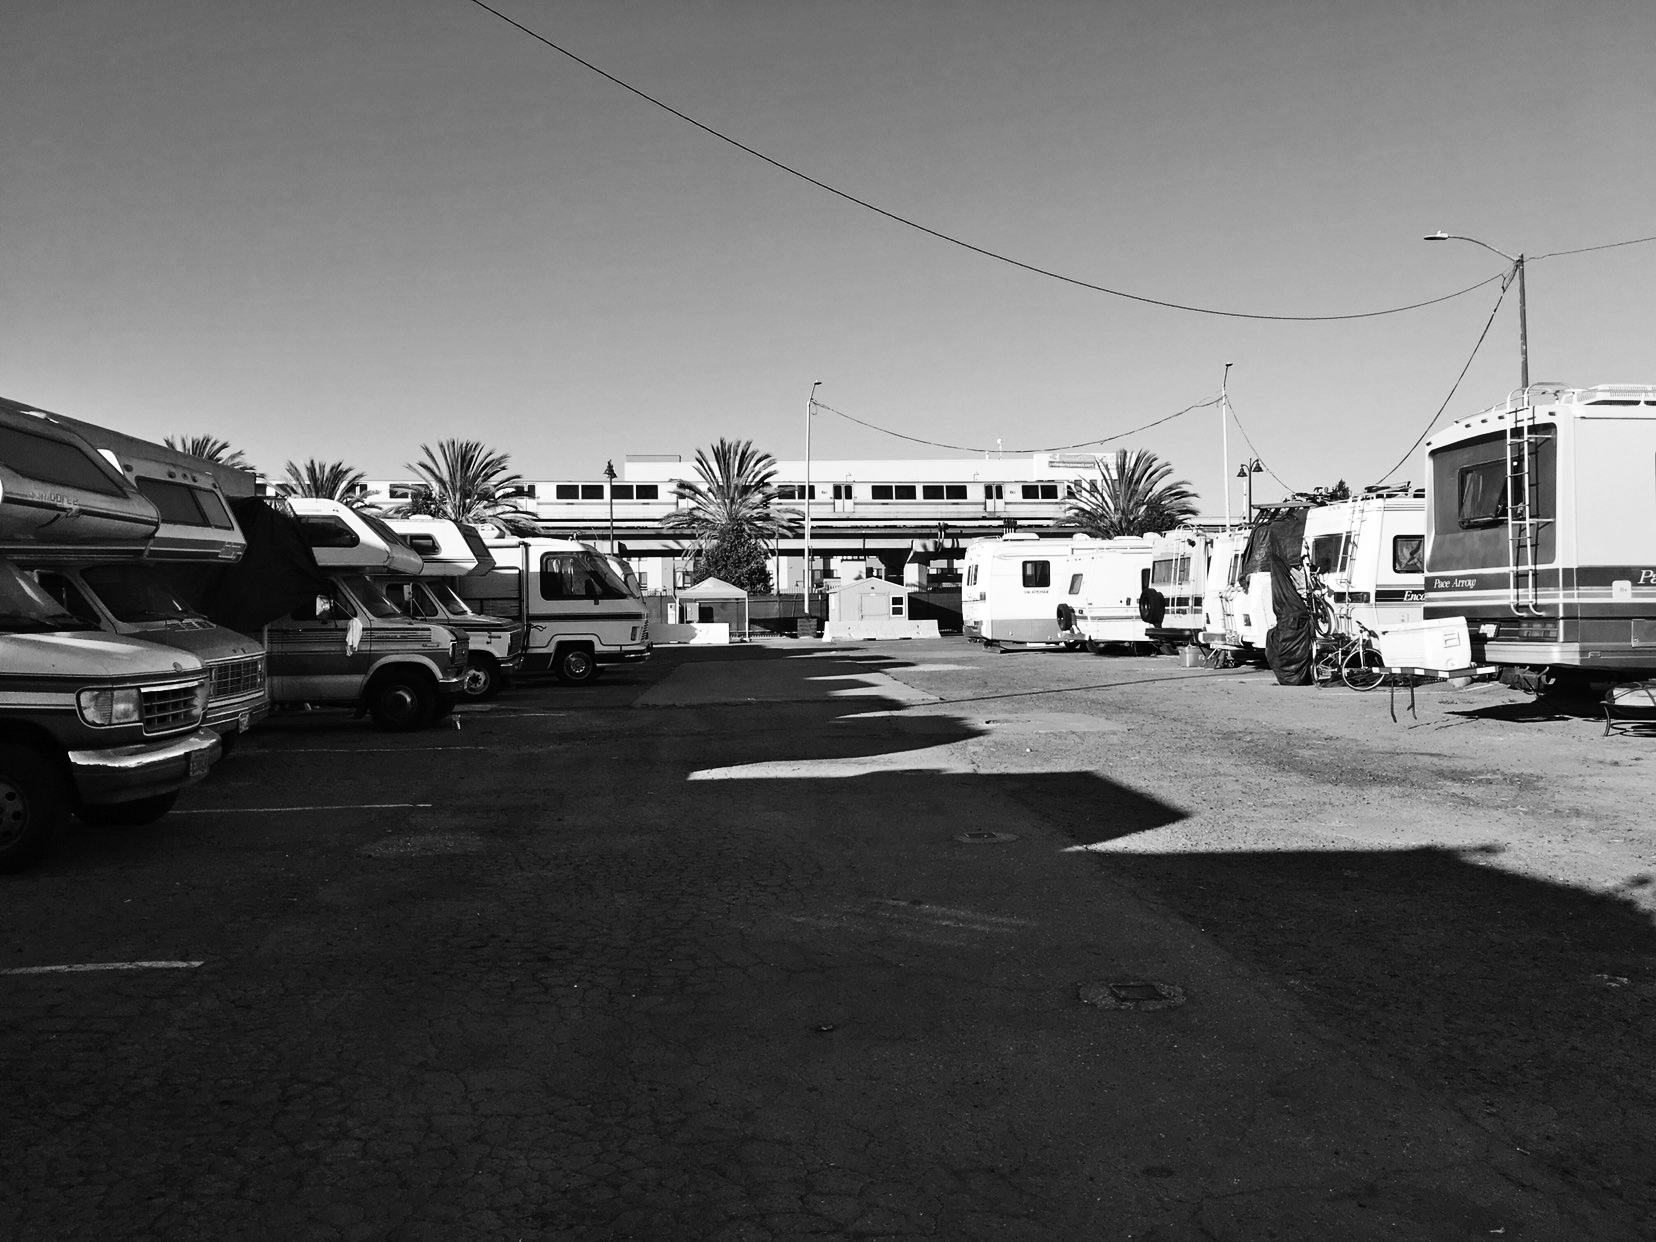 Black and white phono of an RV park cast in midday shadow